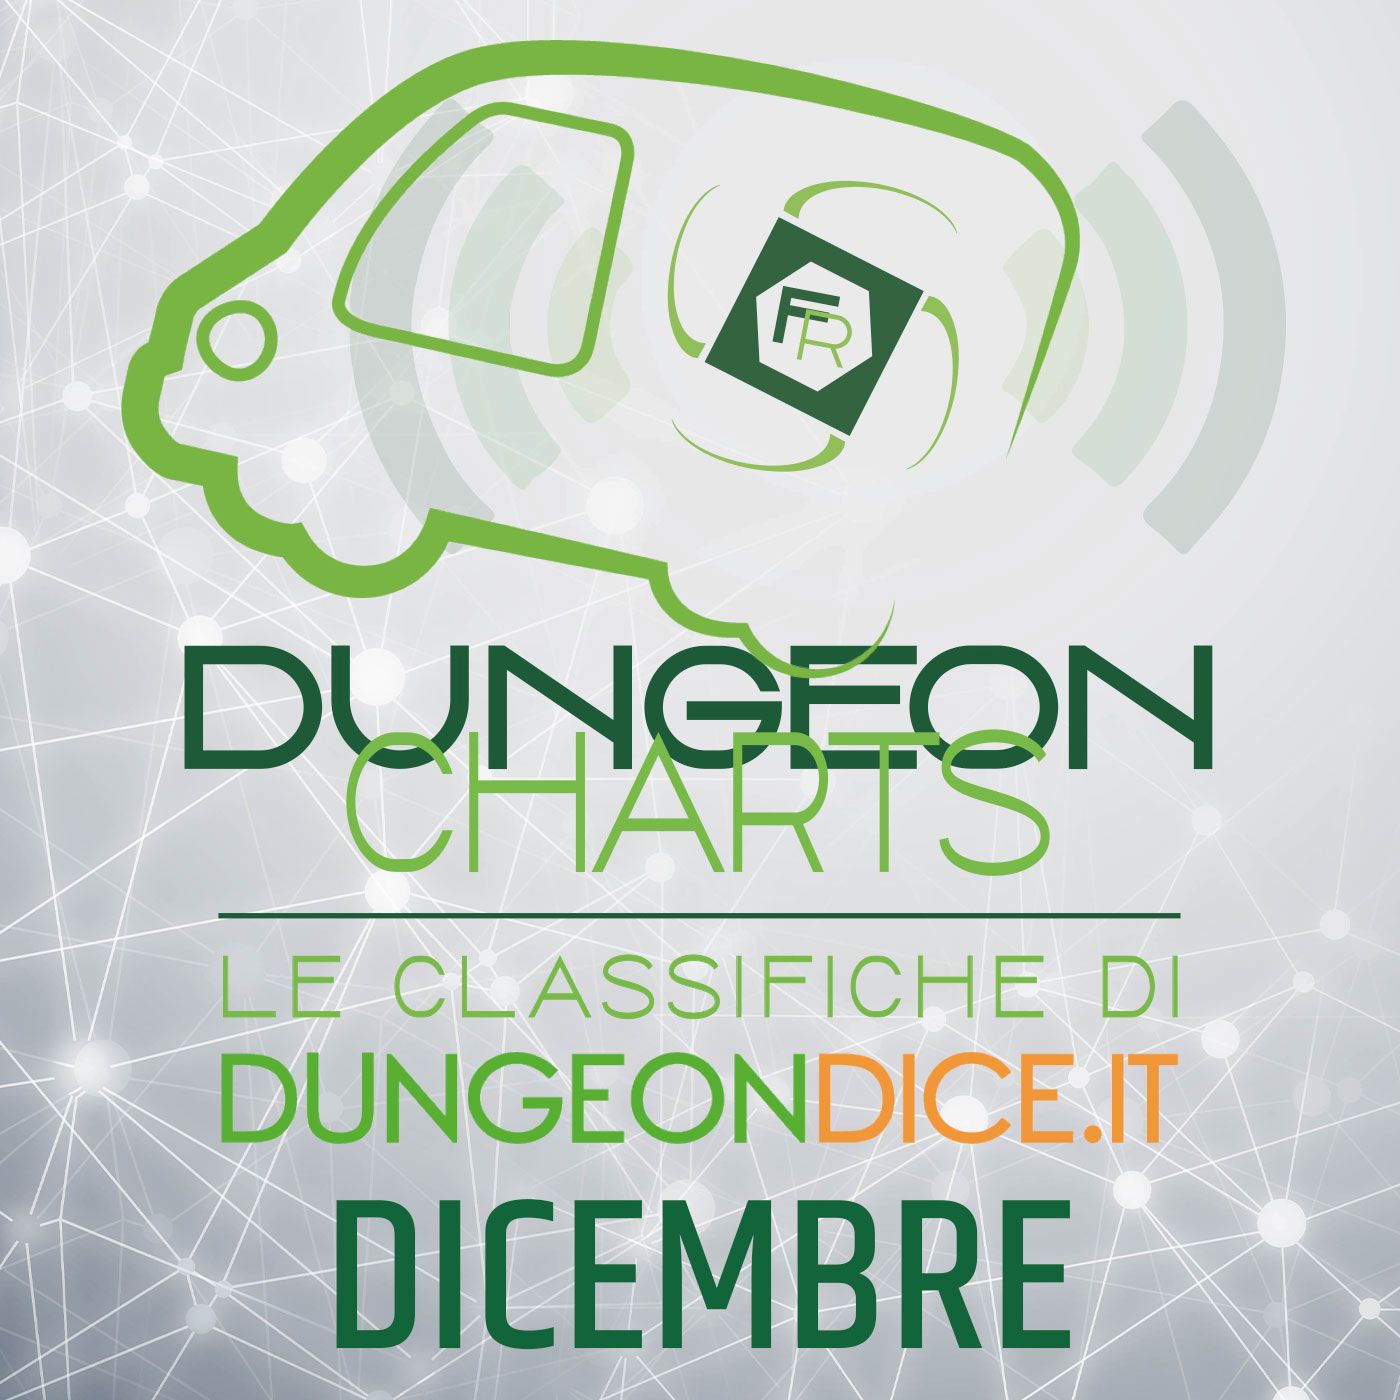 Dungeon Charts - Dicembre 2021